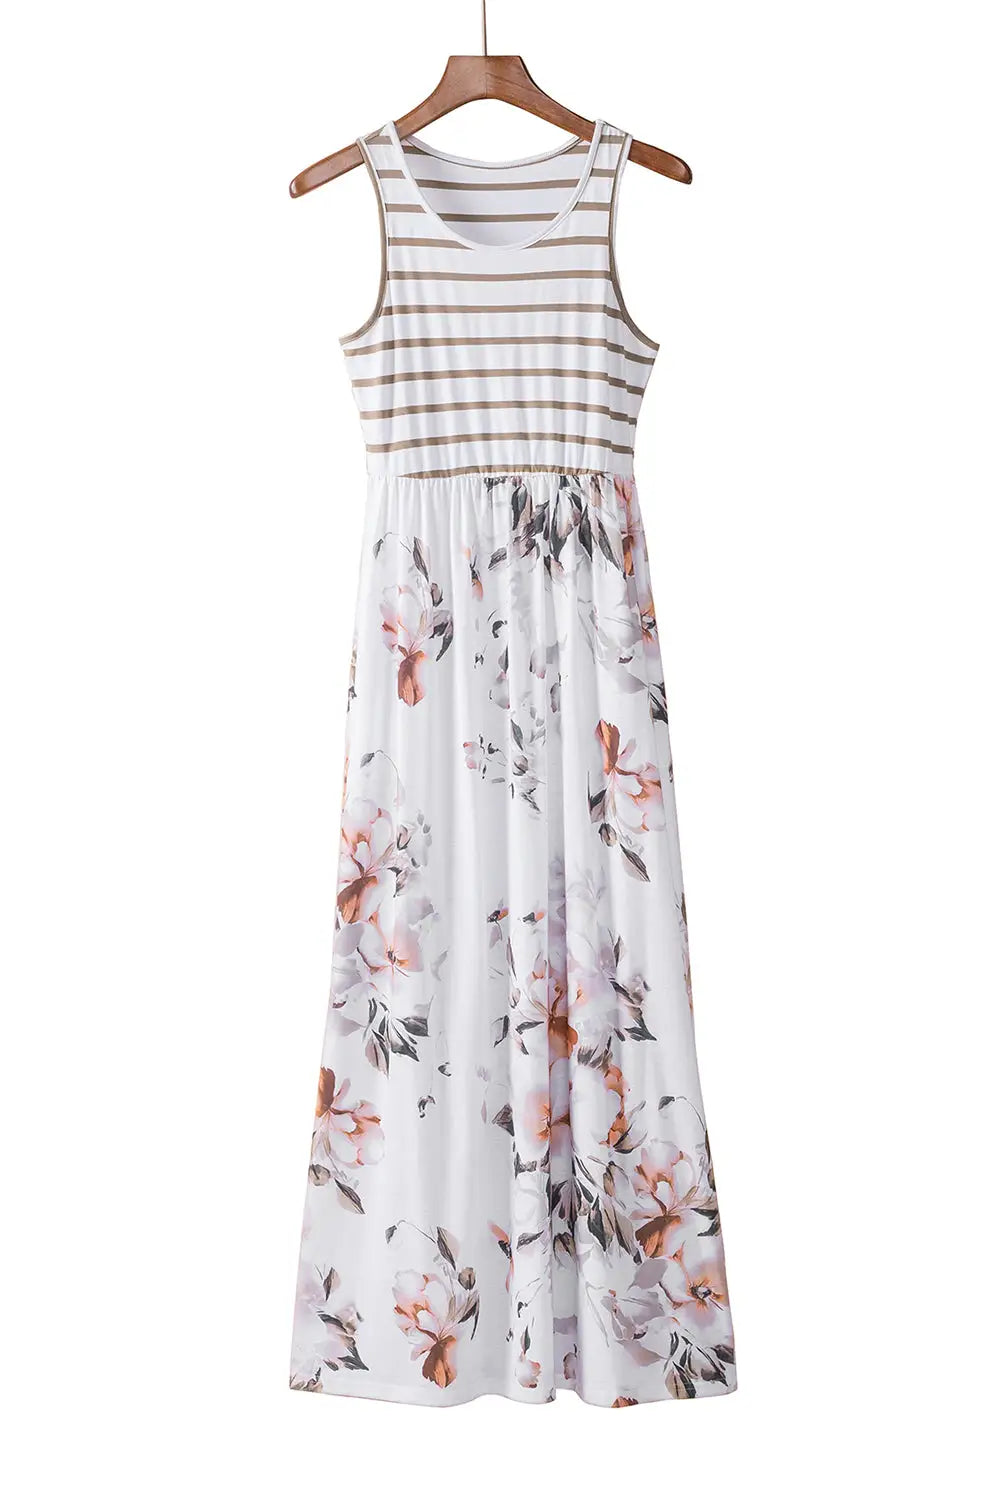 White striped floral print sleeveless maxi dress with pocket - dresses